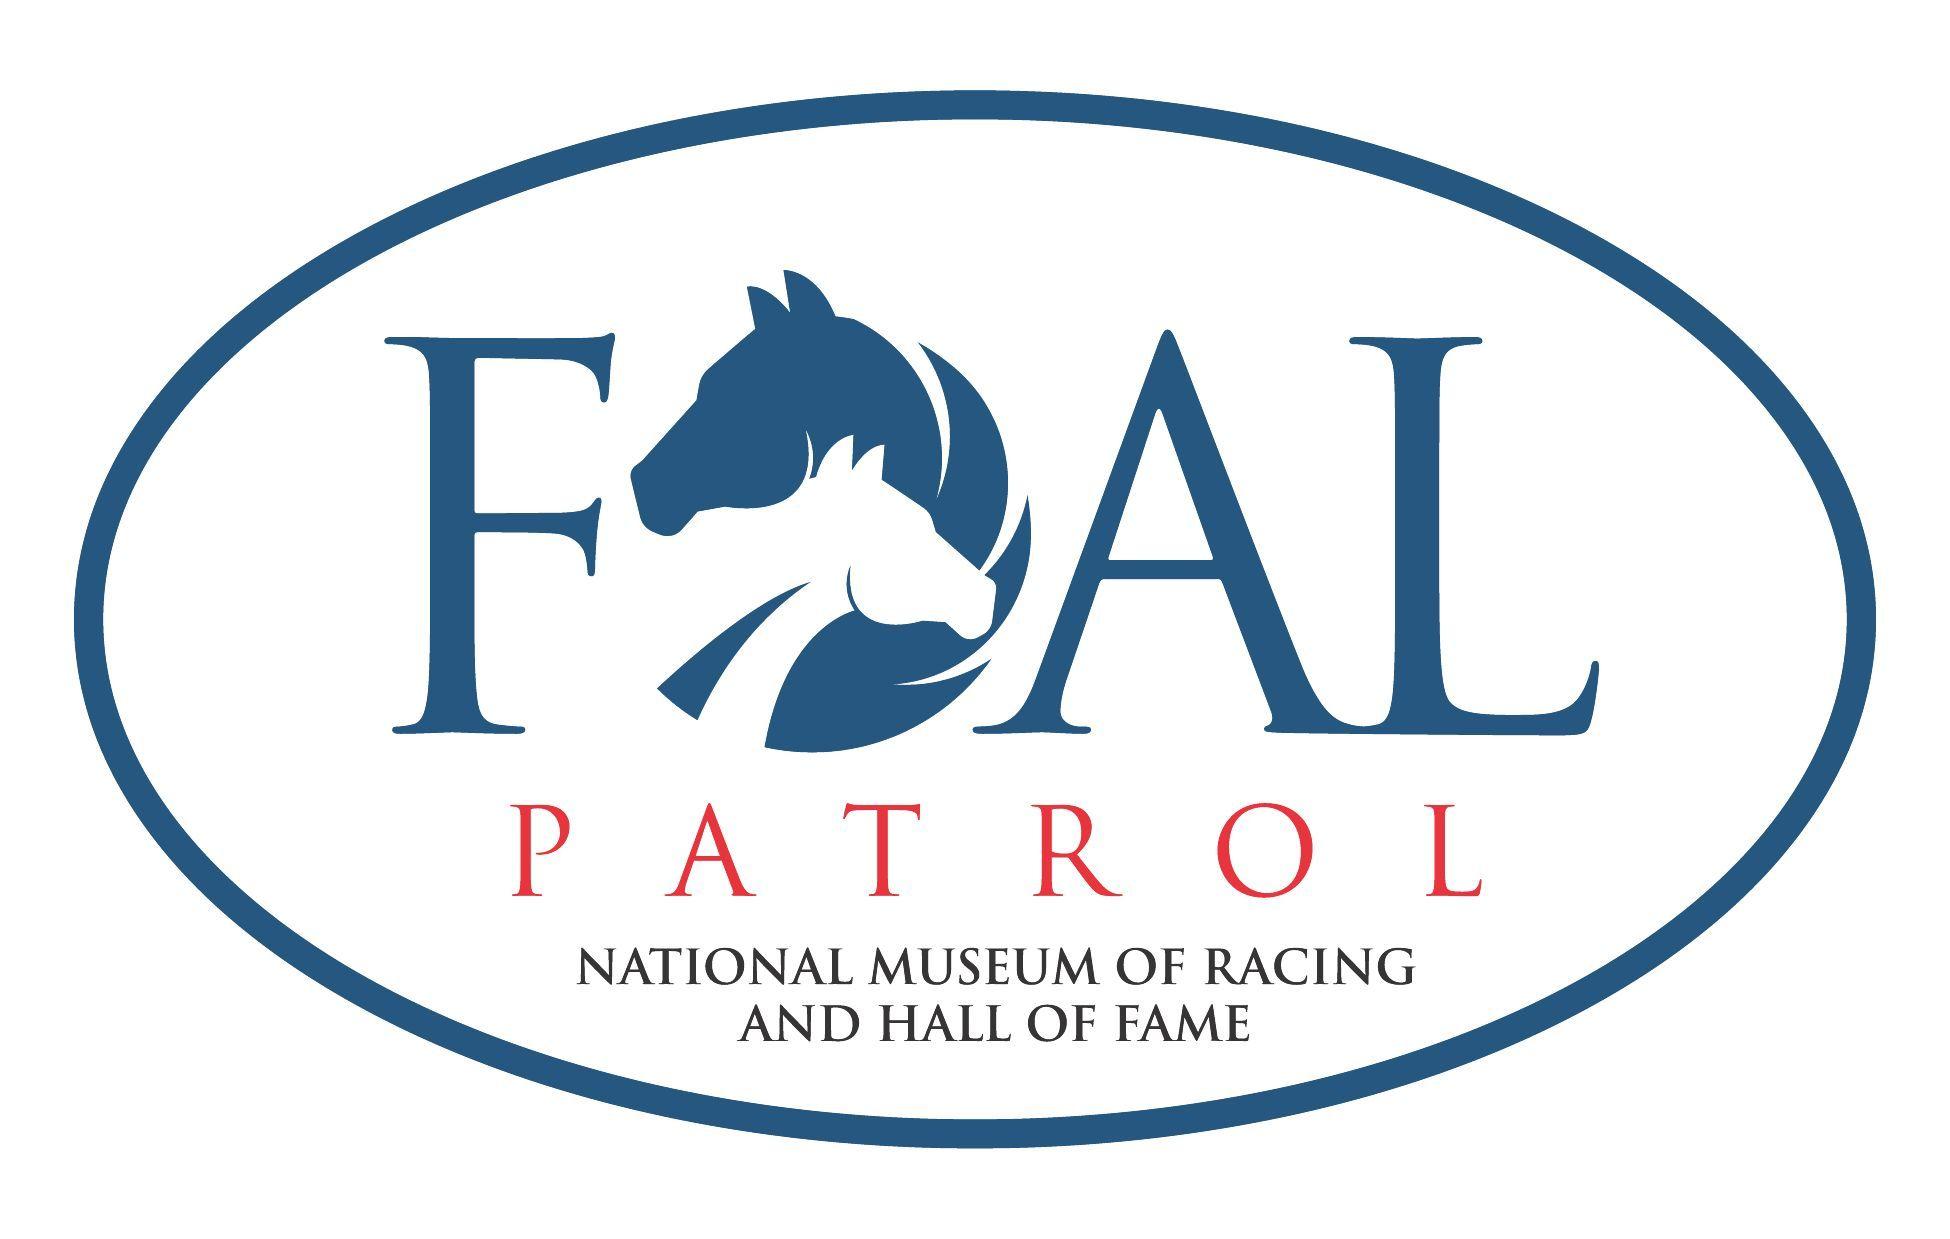 Mare and Foal Logo - Foal Patrol primary logo York Thoroughbred Breeders, Inc. News